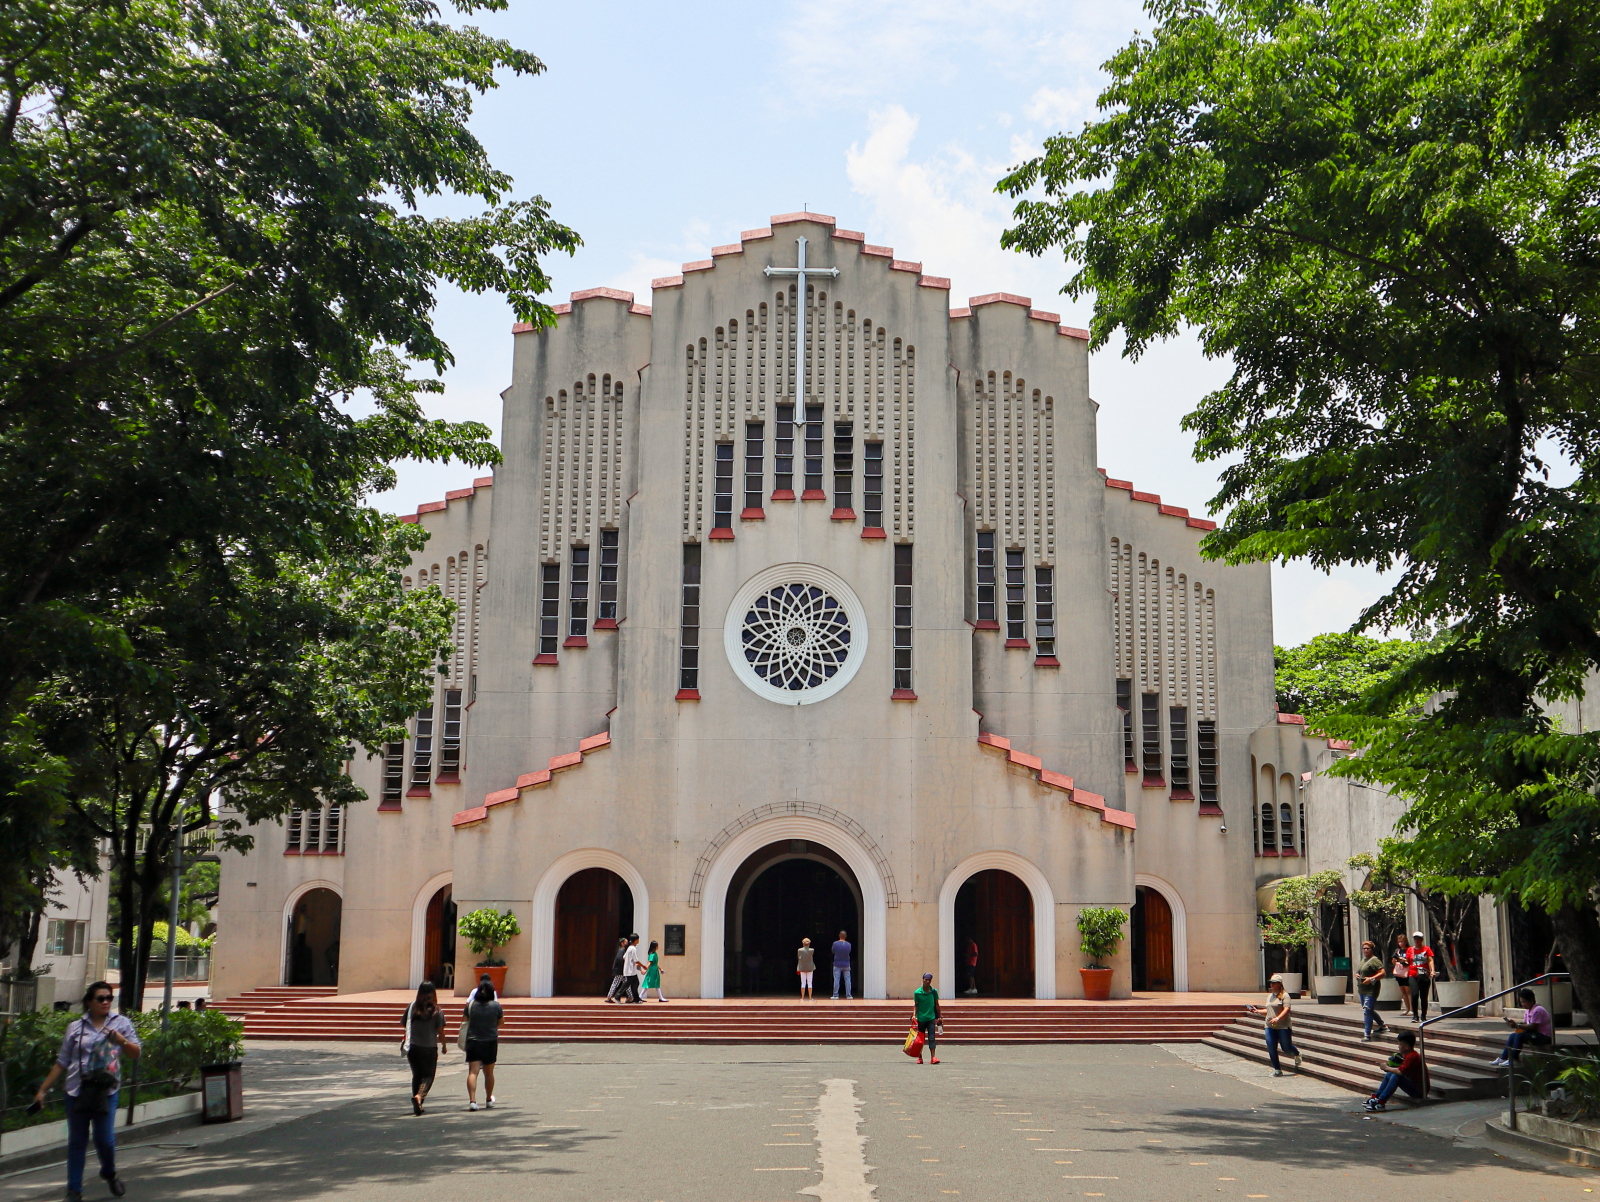 Baclaran Church (National Shrine of Our Mother of Perpetual Help) – Parañaque, Metro Manila, Philippines